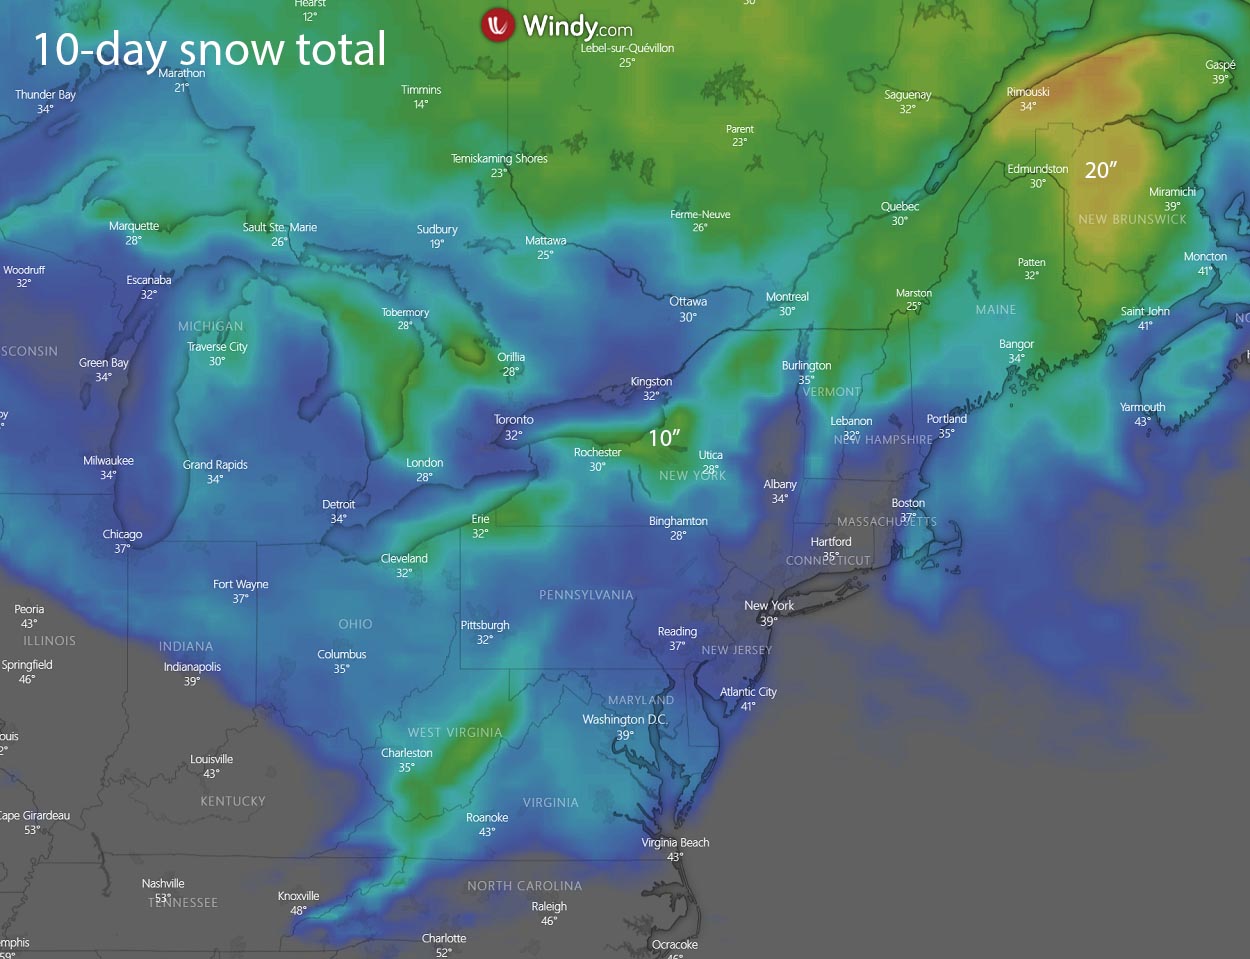 thanksgiving-weather-forecast-cold-blast-lake-effect-snow-northeast-united-states-snowfall